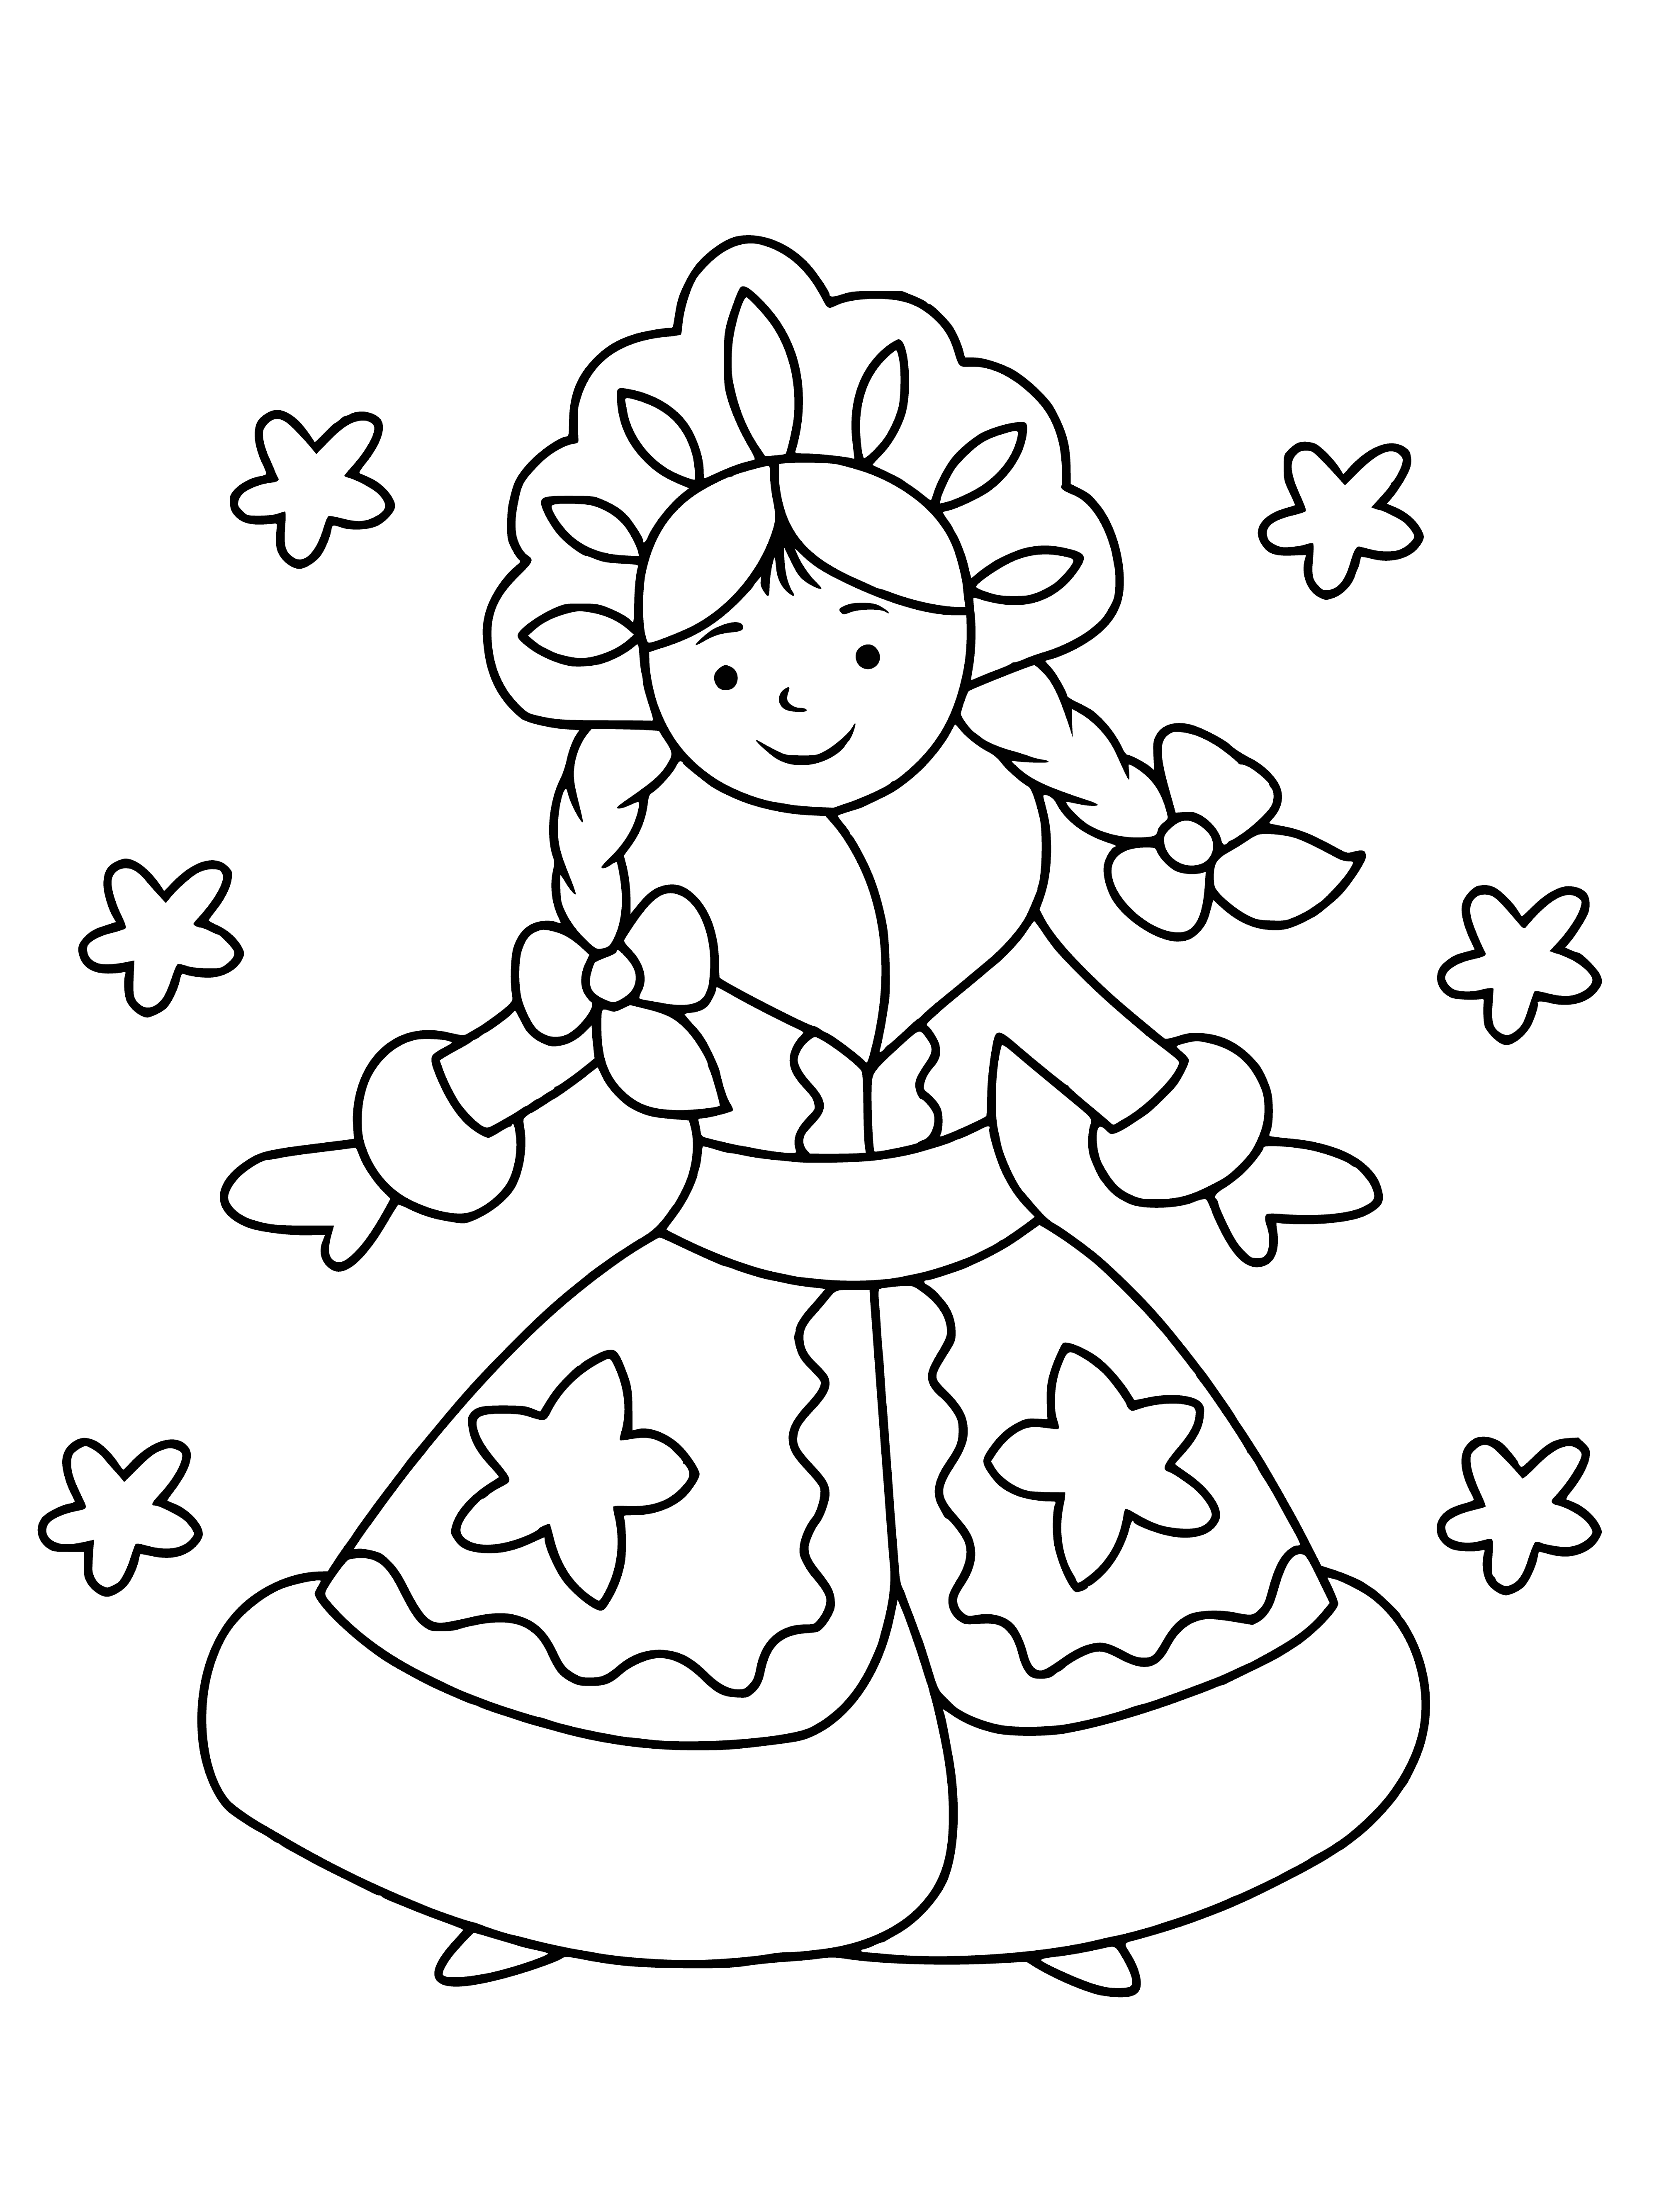 coloring page: Girl made of snow stands amongst winter wonderland of snow-capped trees & icicles, looking serene.